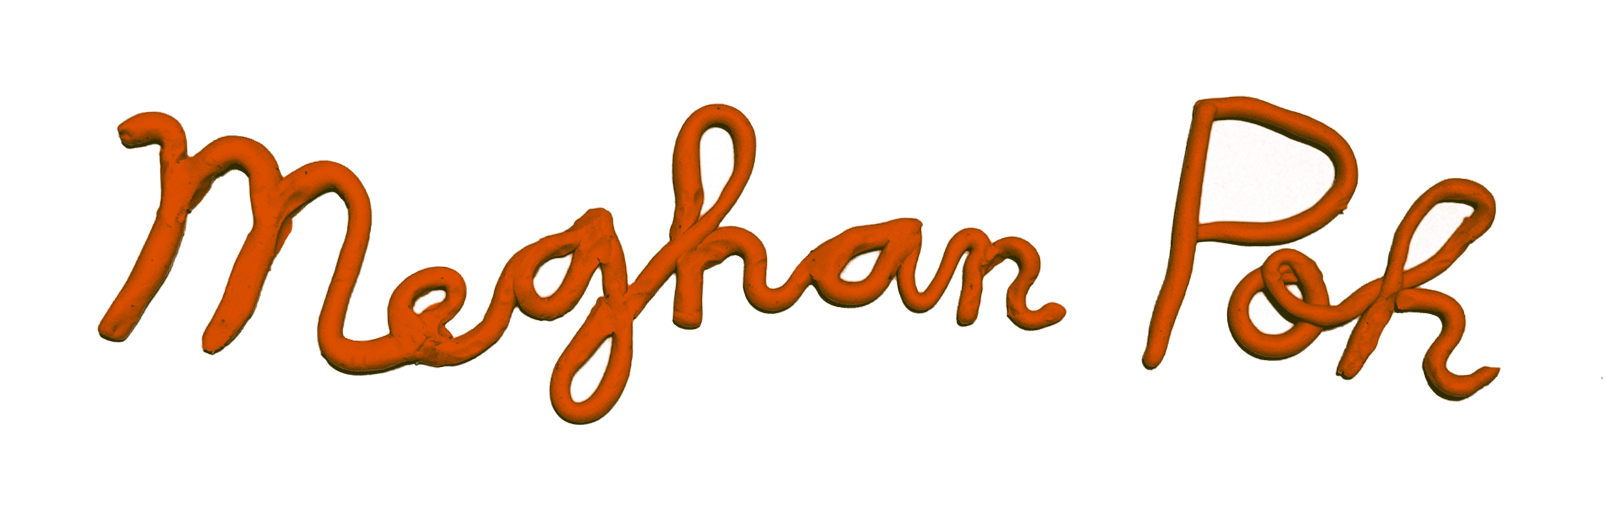 Cursive logotype of Meghan Poh, made in plasticine